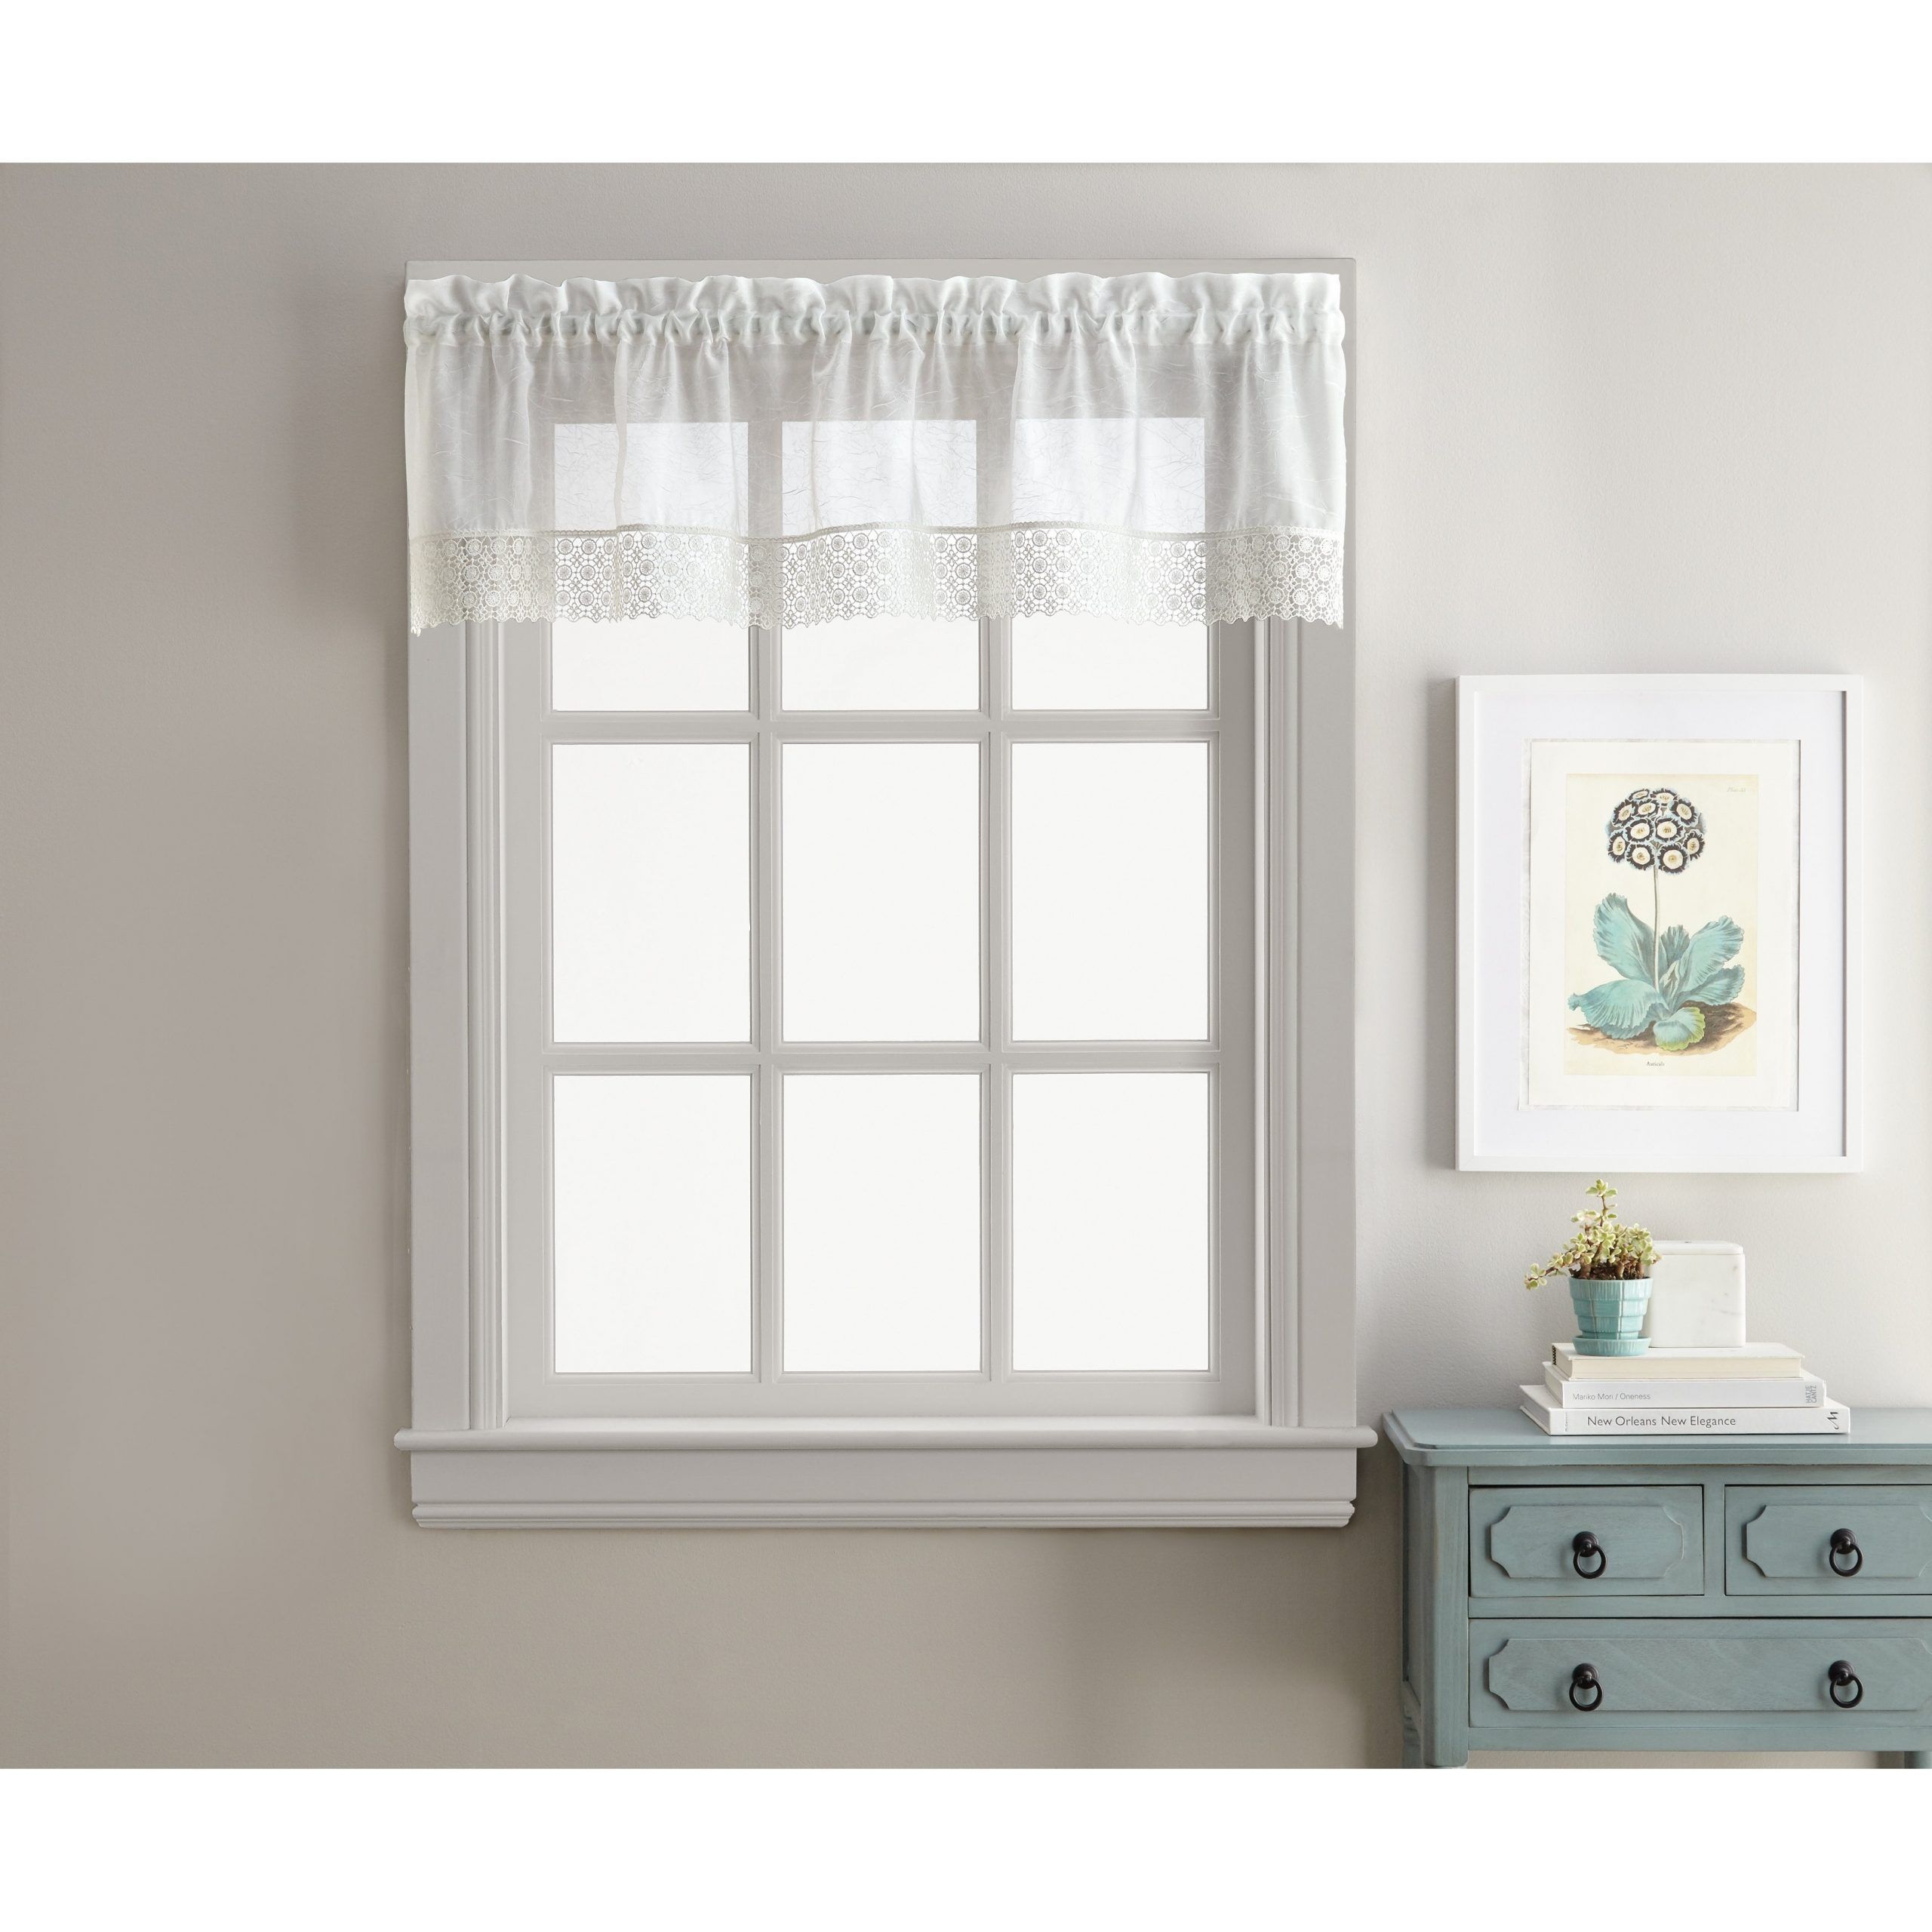 Sweet Adele White Tailored Valance And Tier Pair Curtain Collection For Tailored Valance And Tier Curtains (View 5 of 20)